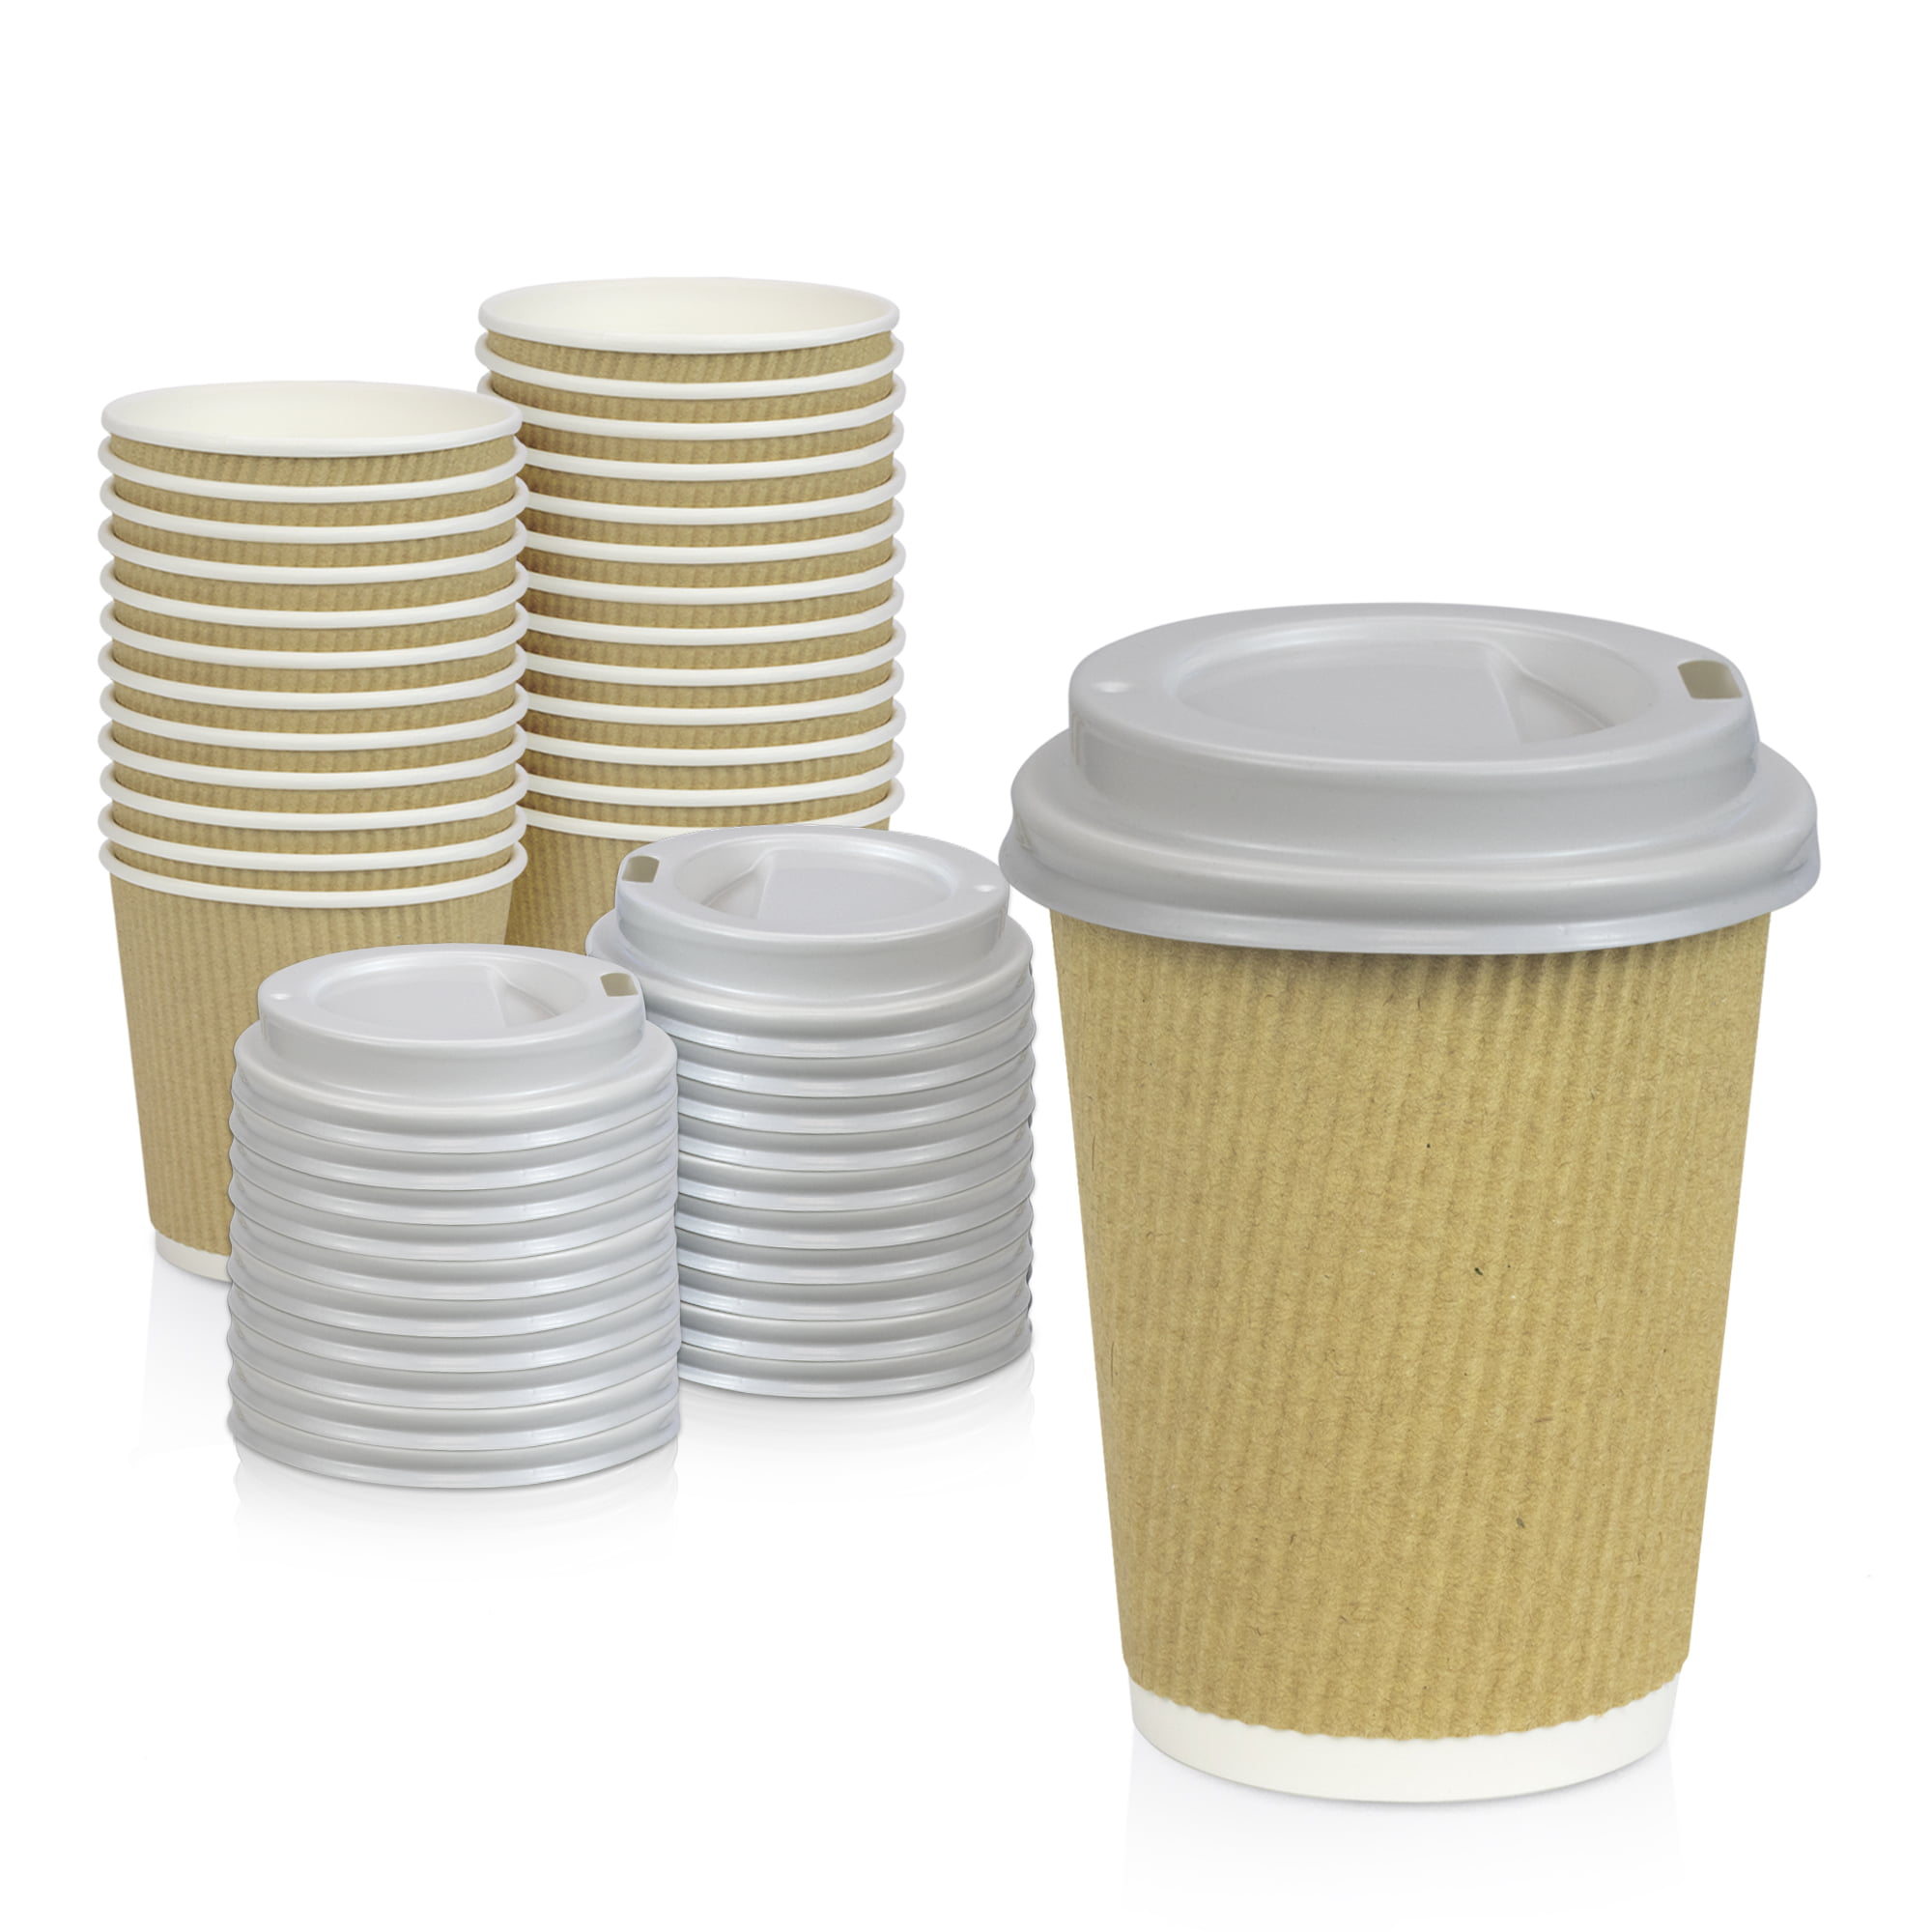 50 Sets - 12 oz.] Insulated Ripple Paper Hot Coffee Cups With Lids 